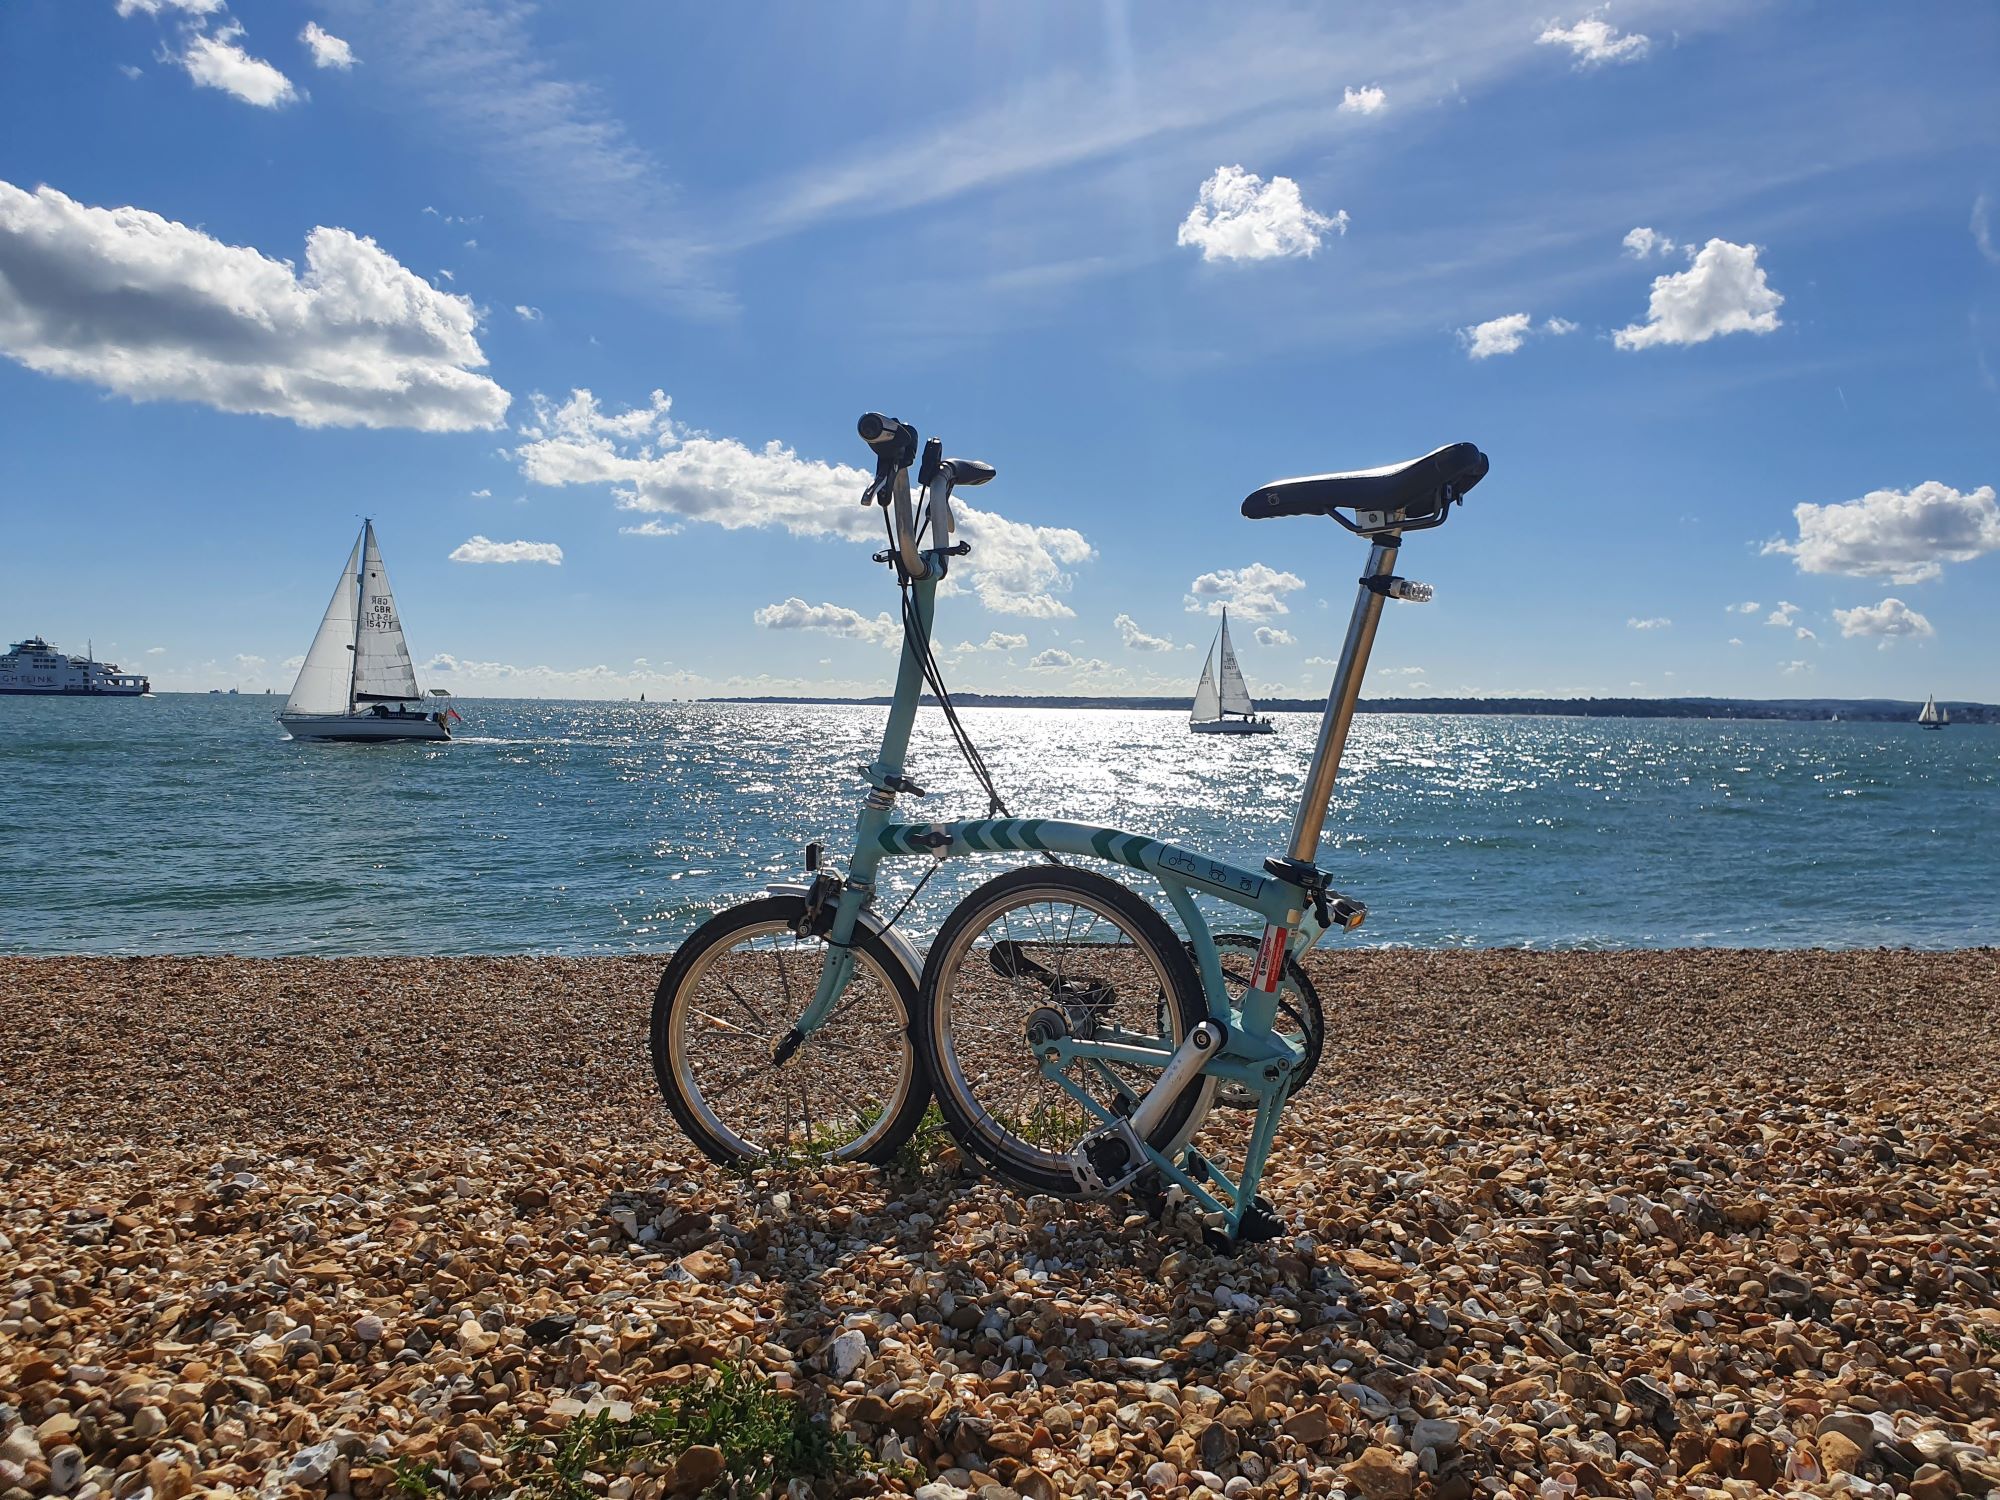 A folding bicycle on the beach with a sail boat on the sea in the background